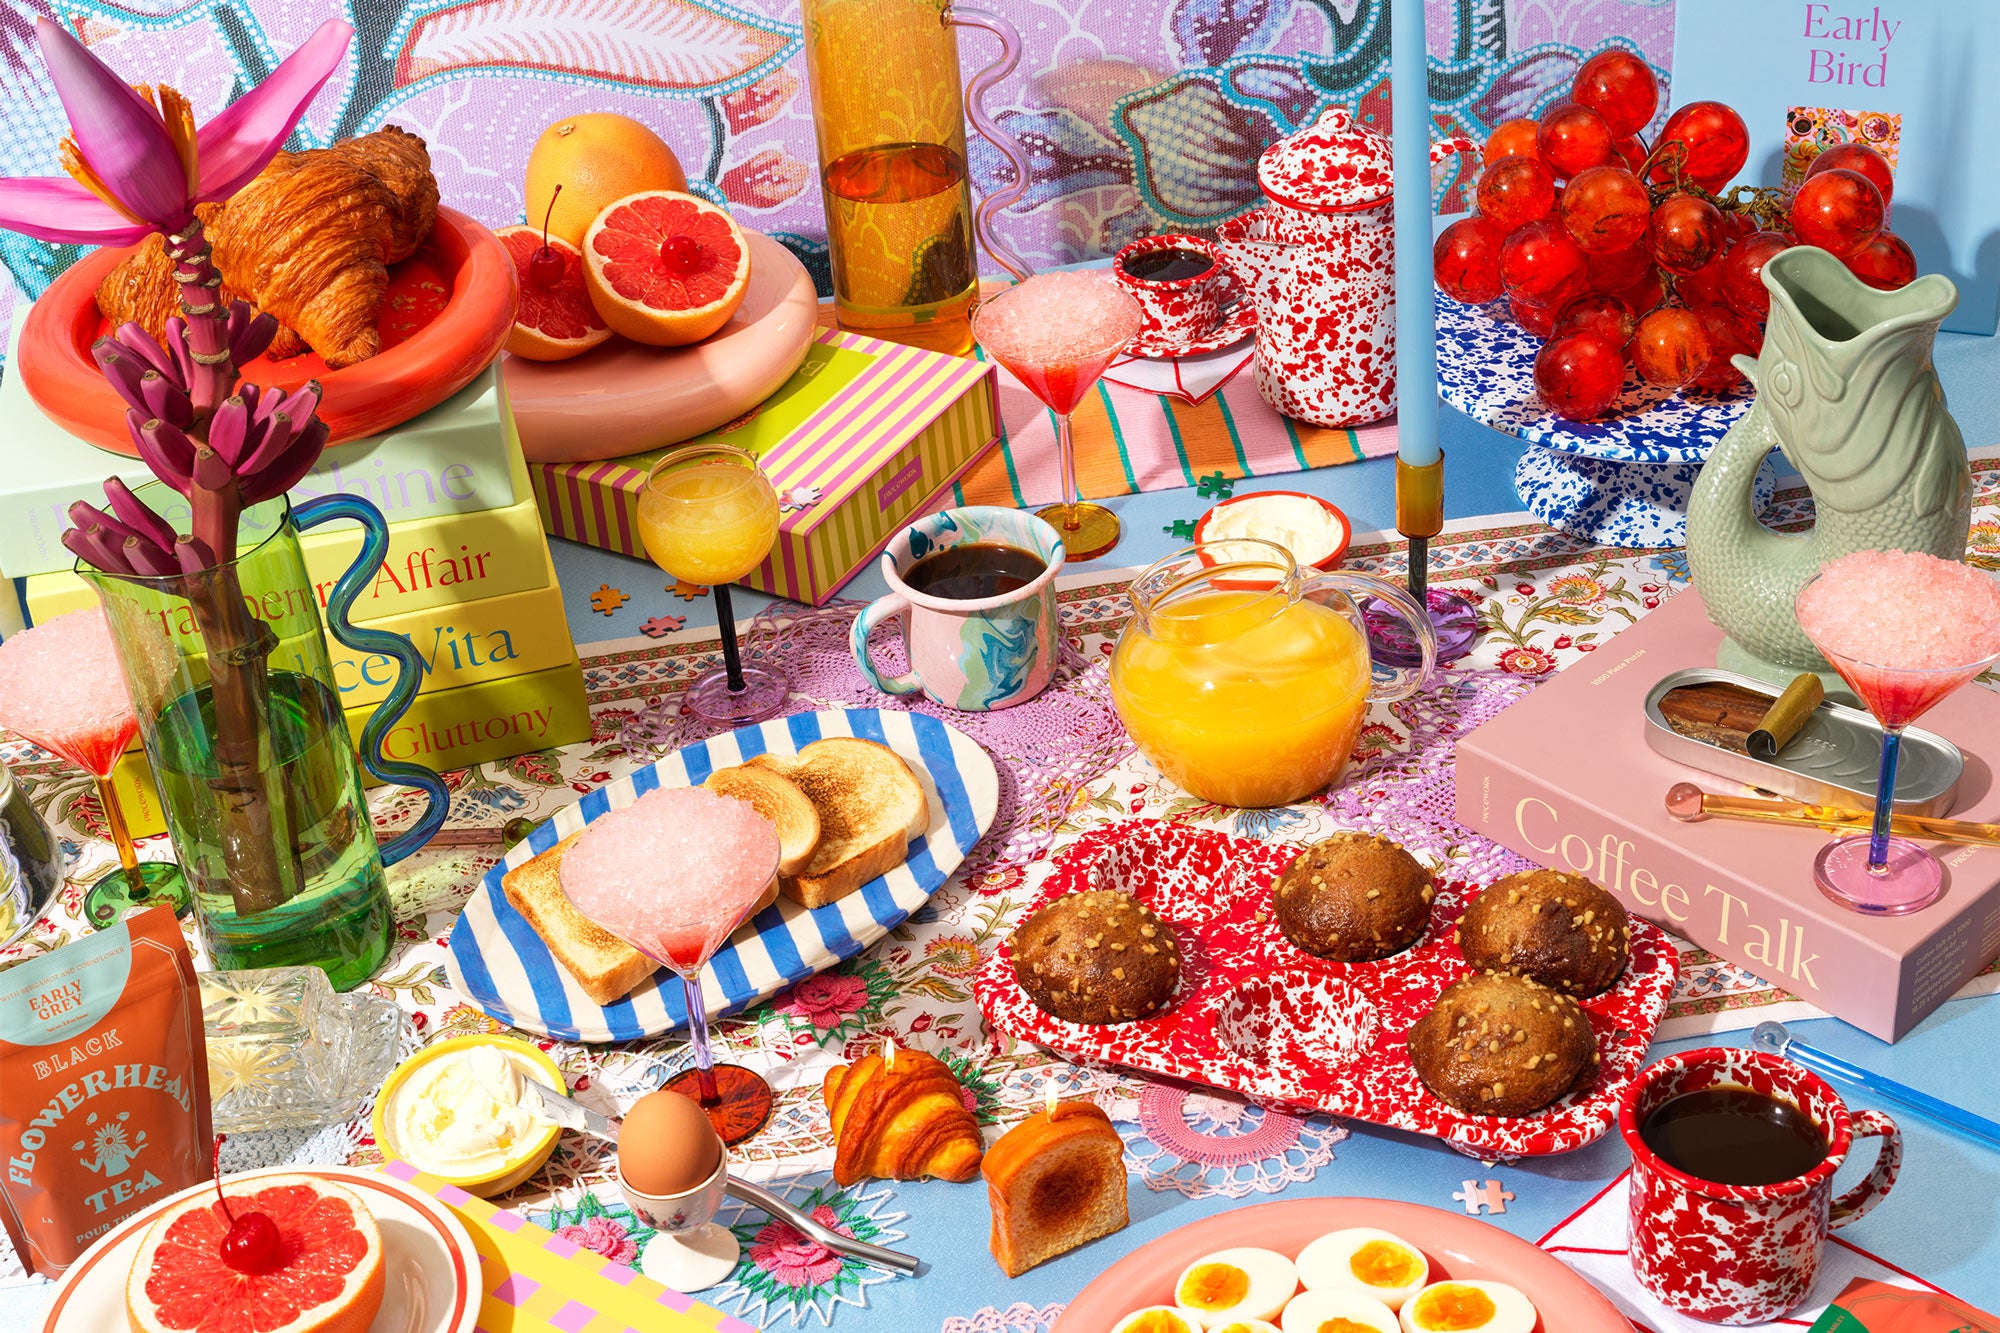 Brunch lifestyle scene showcasing a vibrant scene of puzzle boxes and other gifts and goods on a table